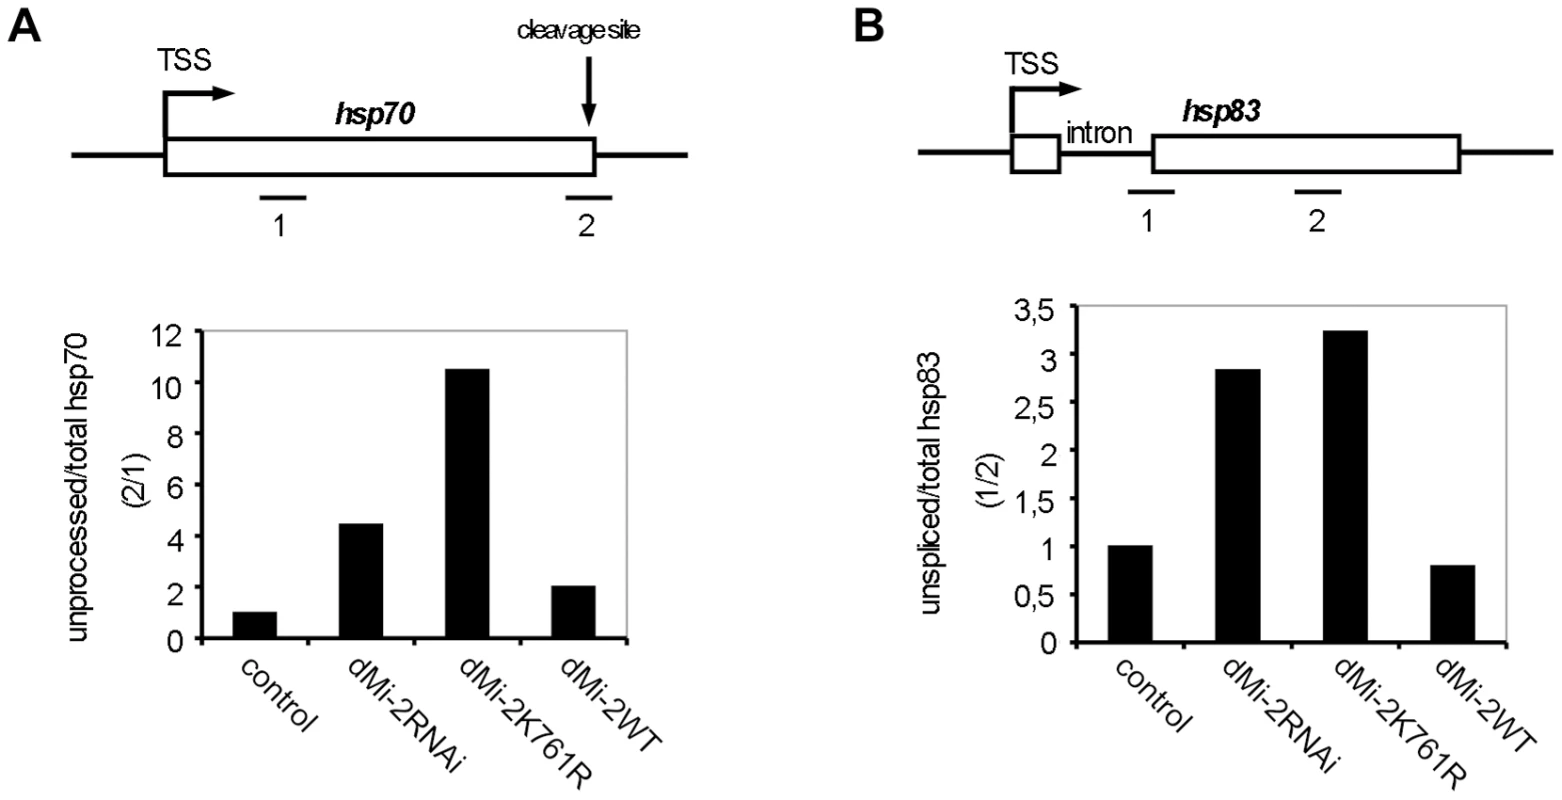 dMi-2 is required for efficient RNA processing.